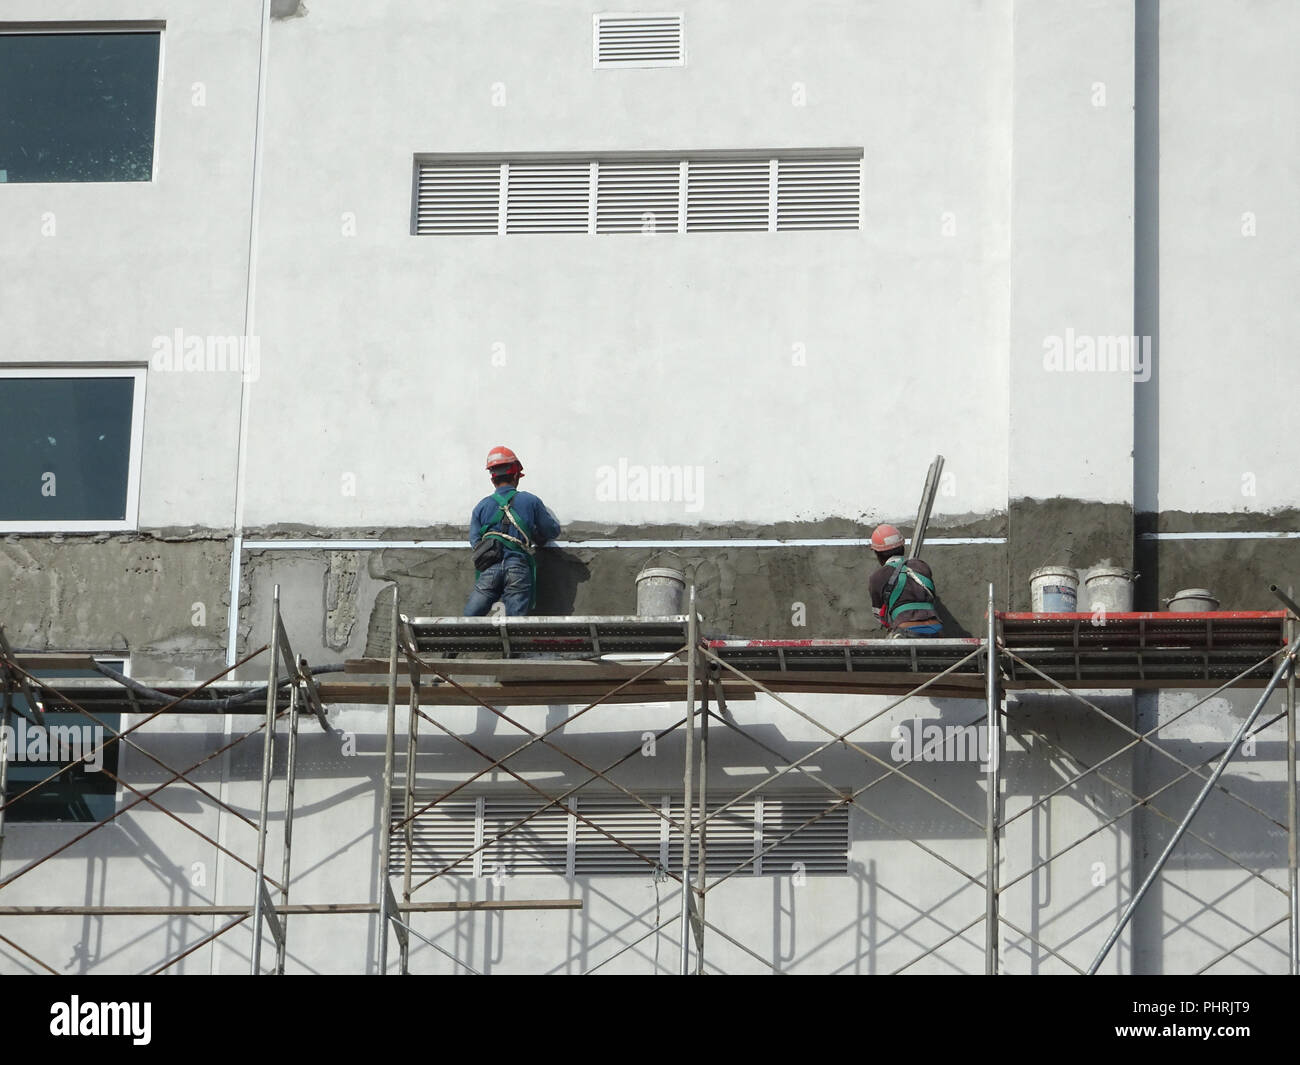 Construction workers plastering wall using cement plaster at the construction site. They are wearing appropriate safety gear to prevent bad happen Stock Photo